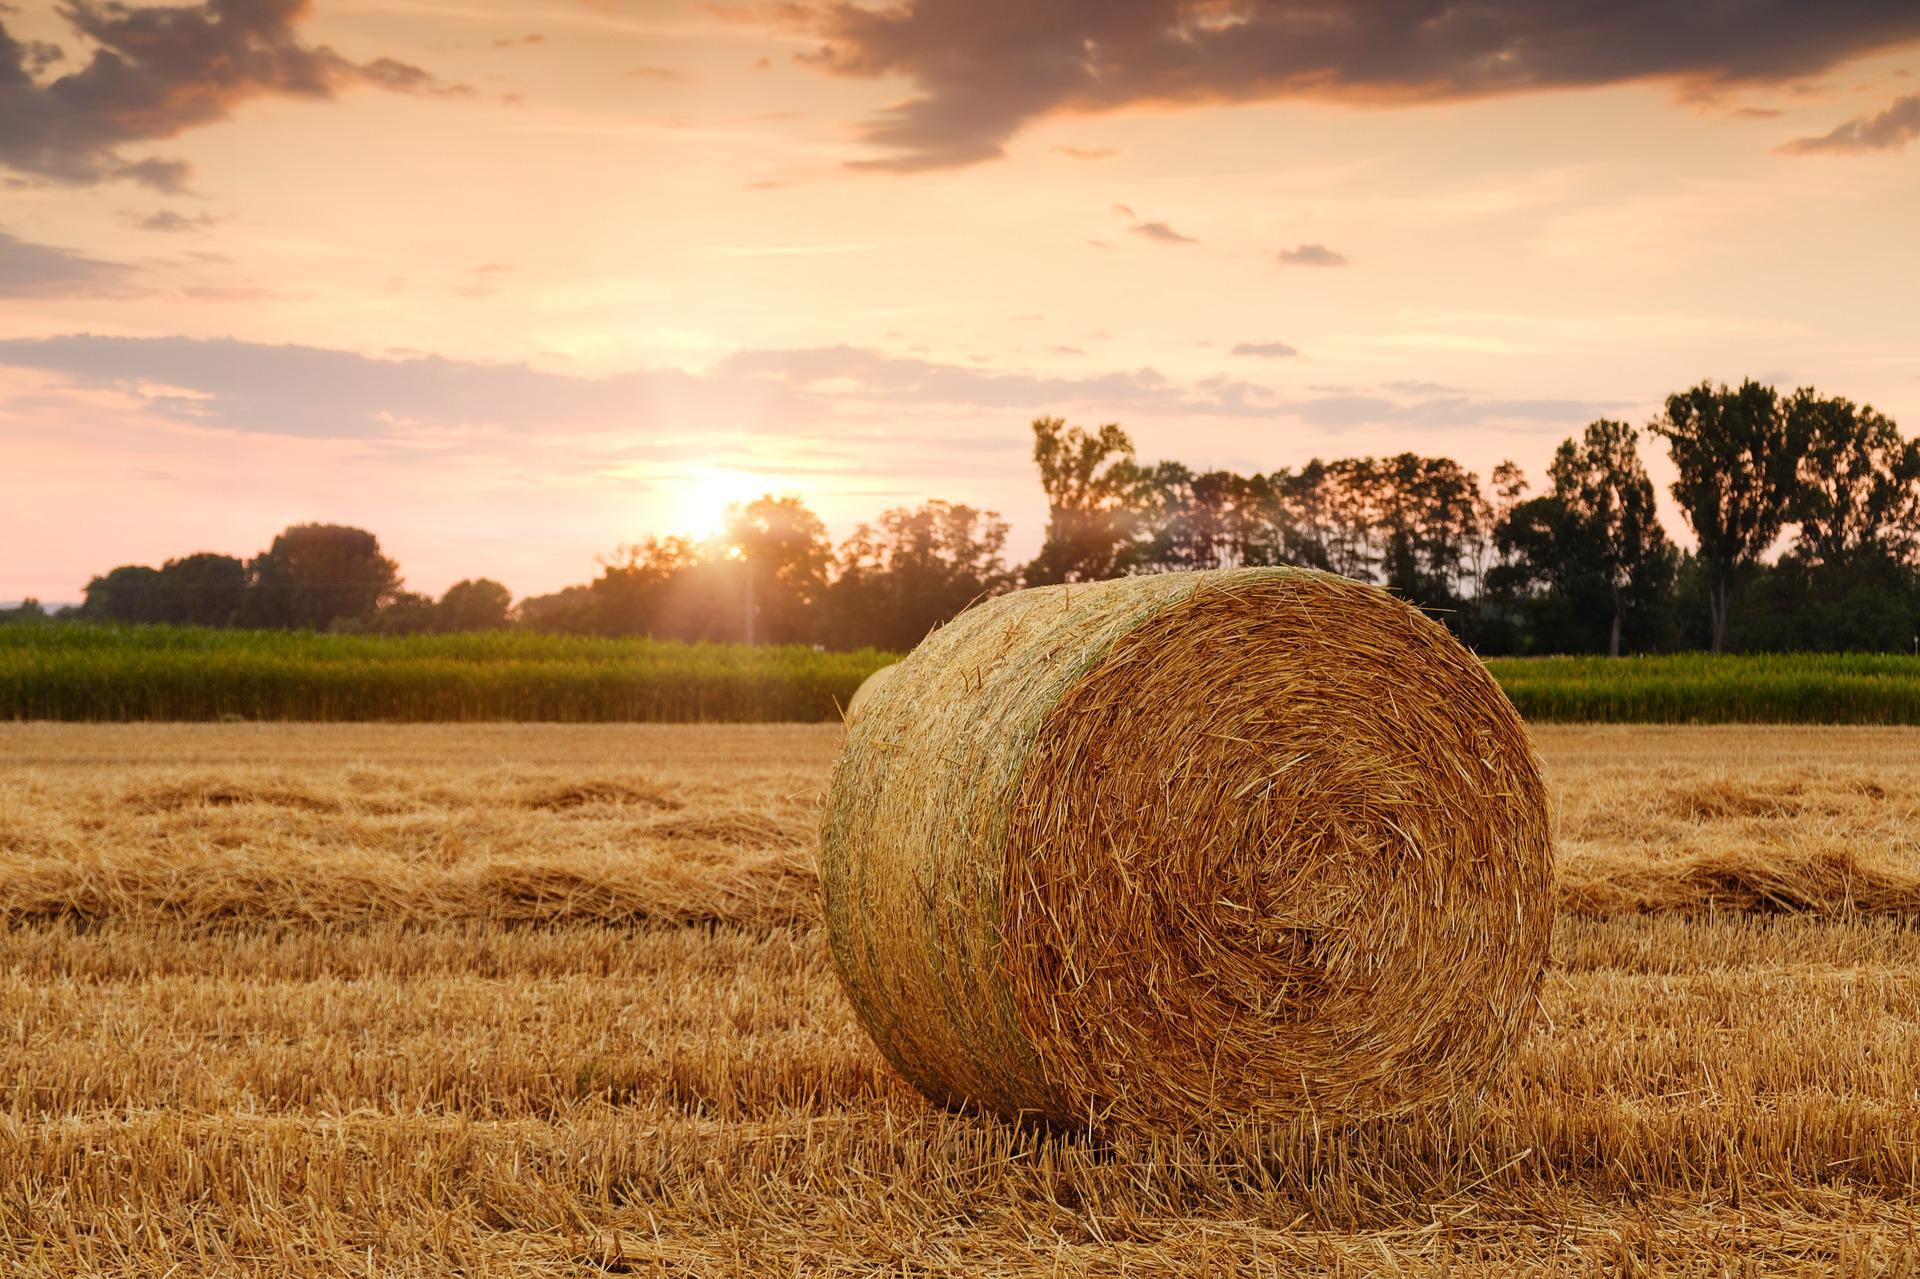 The Hungarian Agriculture Sector Needs Strength and Unity Instead of Division